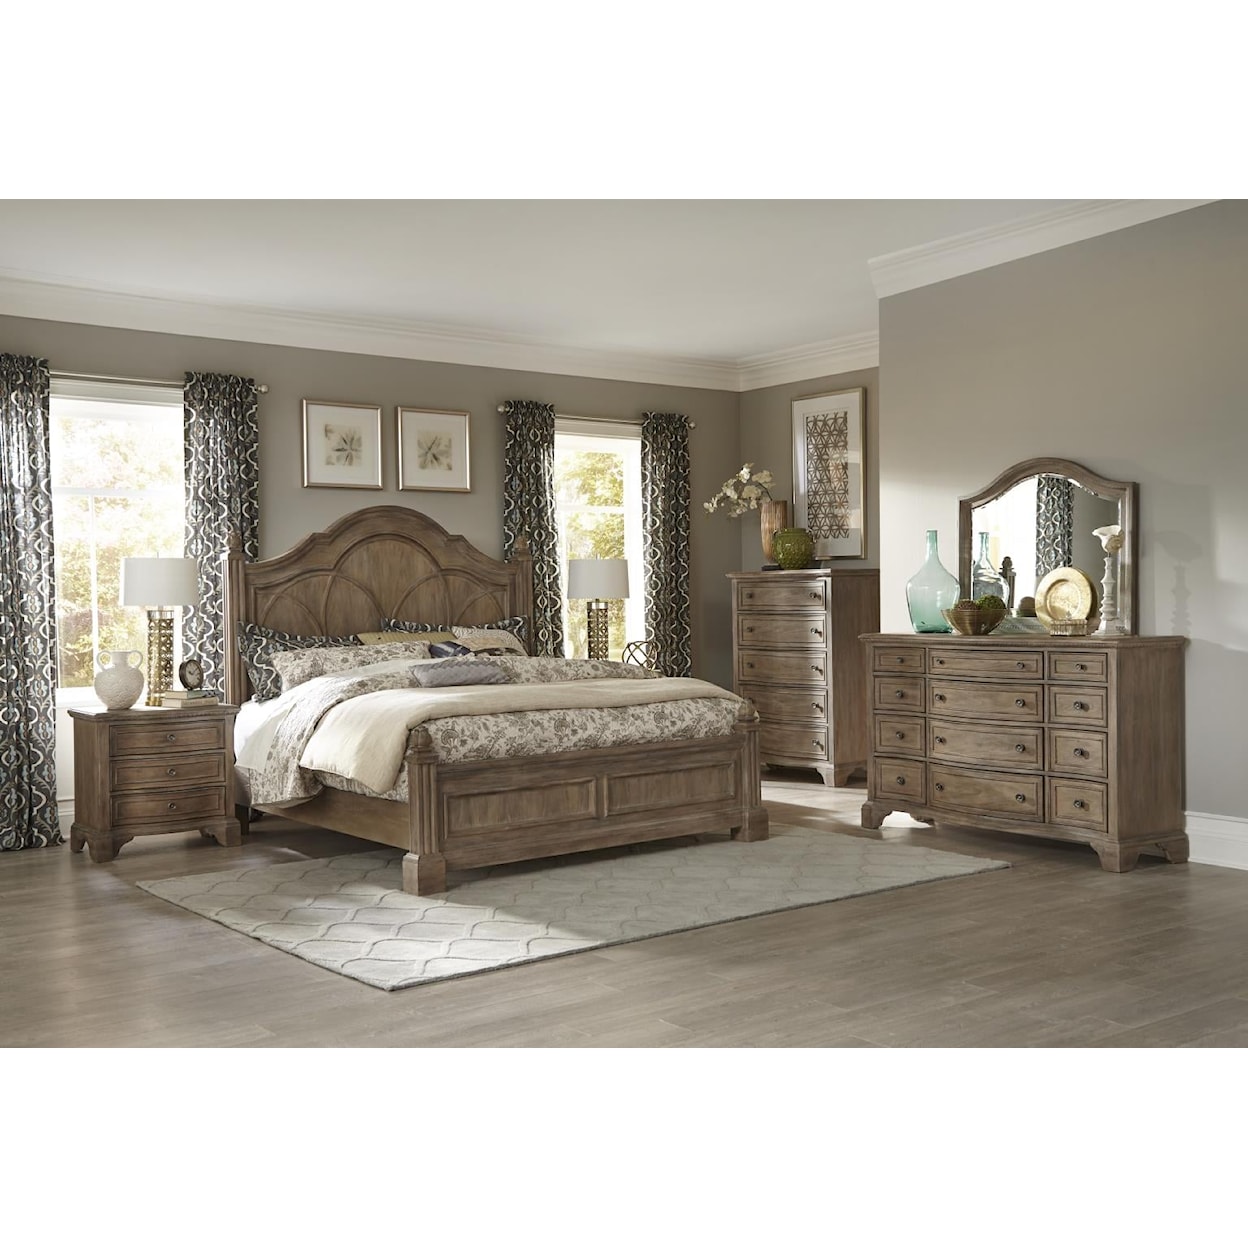 Trisha Yearwood Home Collection by Legacy Classic Jasper County 12-Drawer Dresser